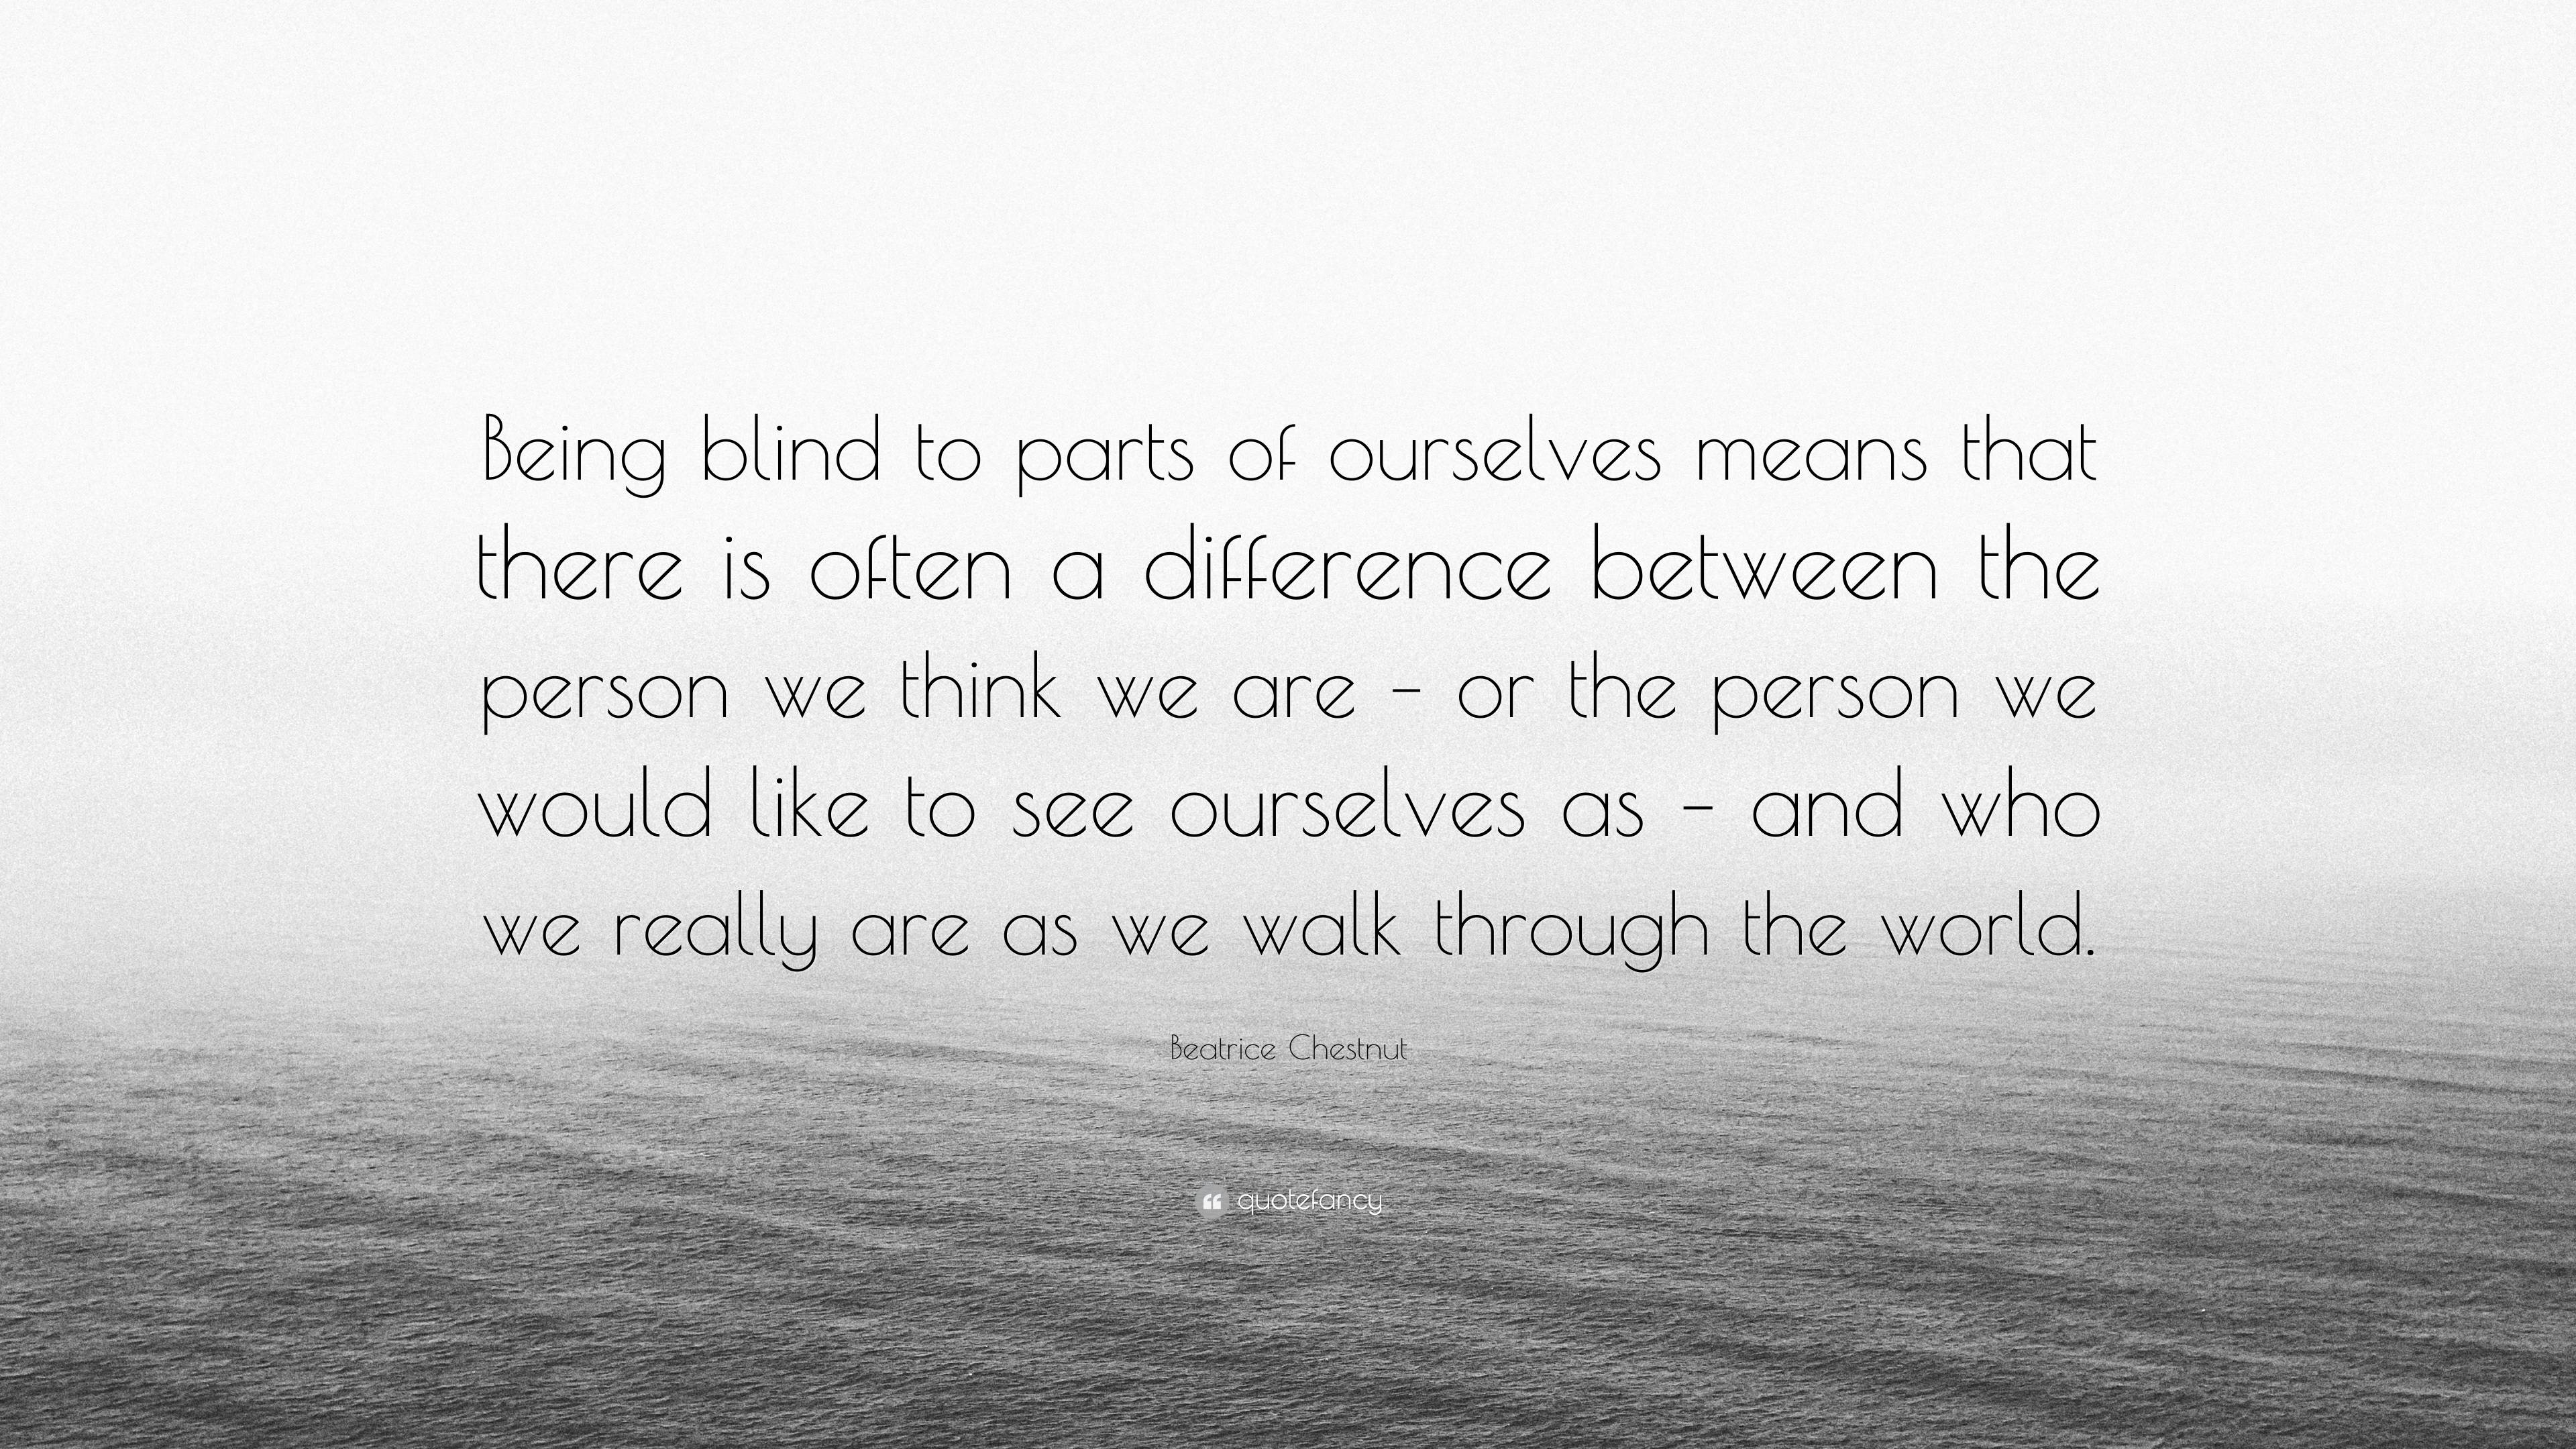 Beatrice Chestnut Quote: “Being blind to parts of ourselves means